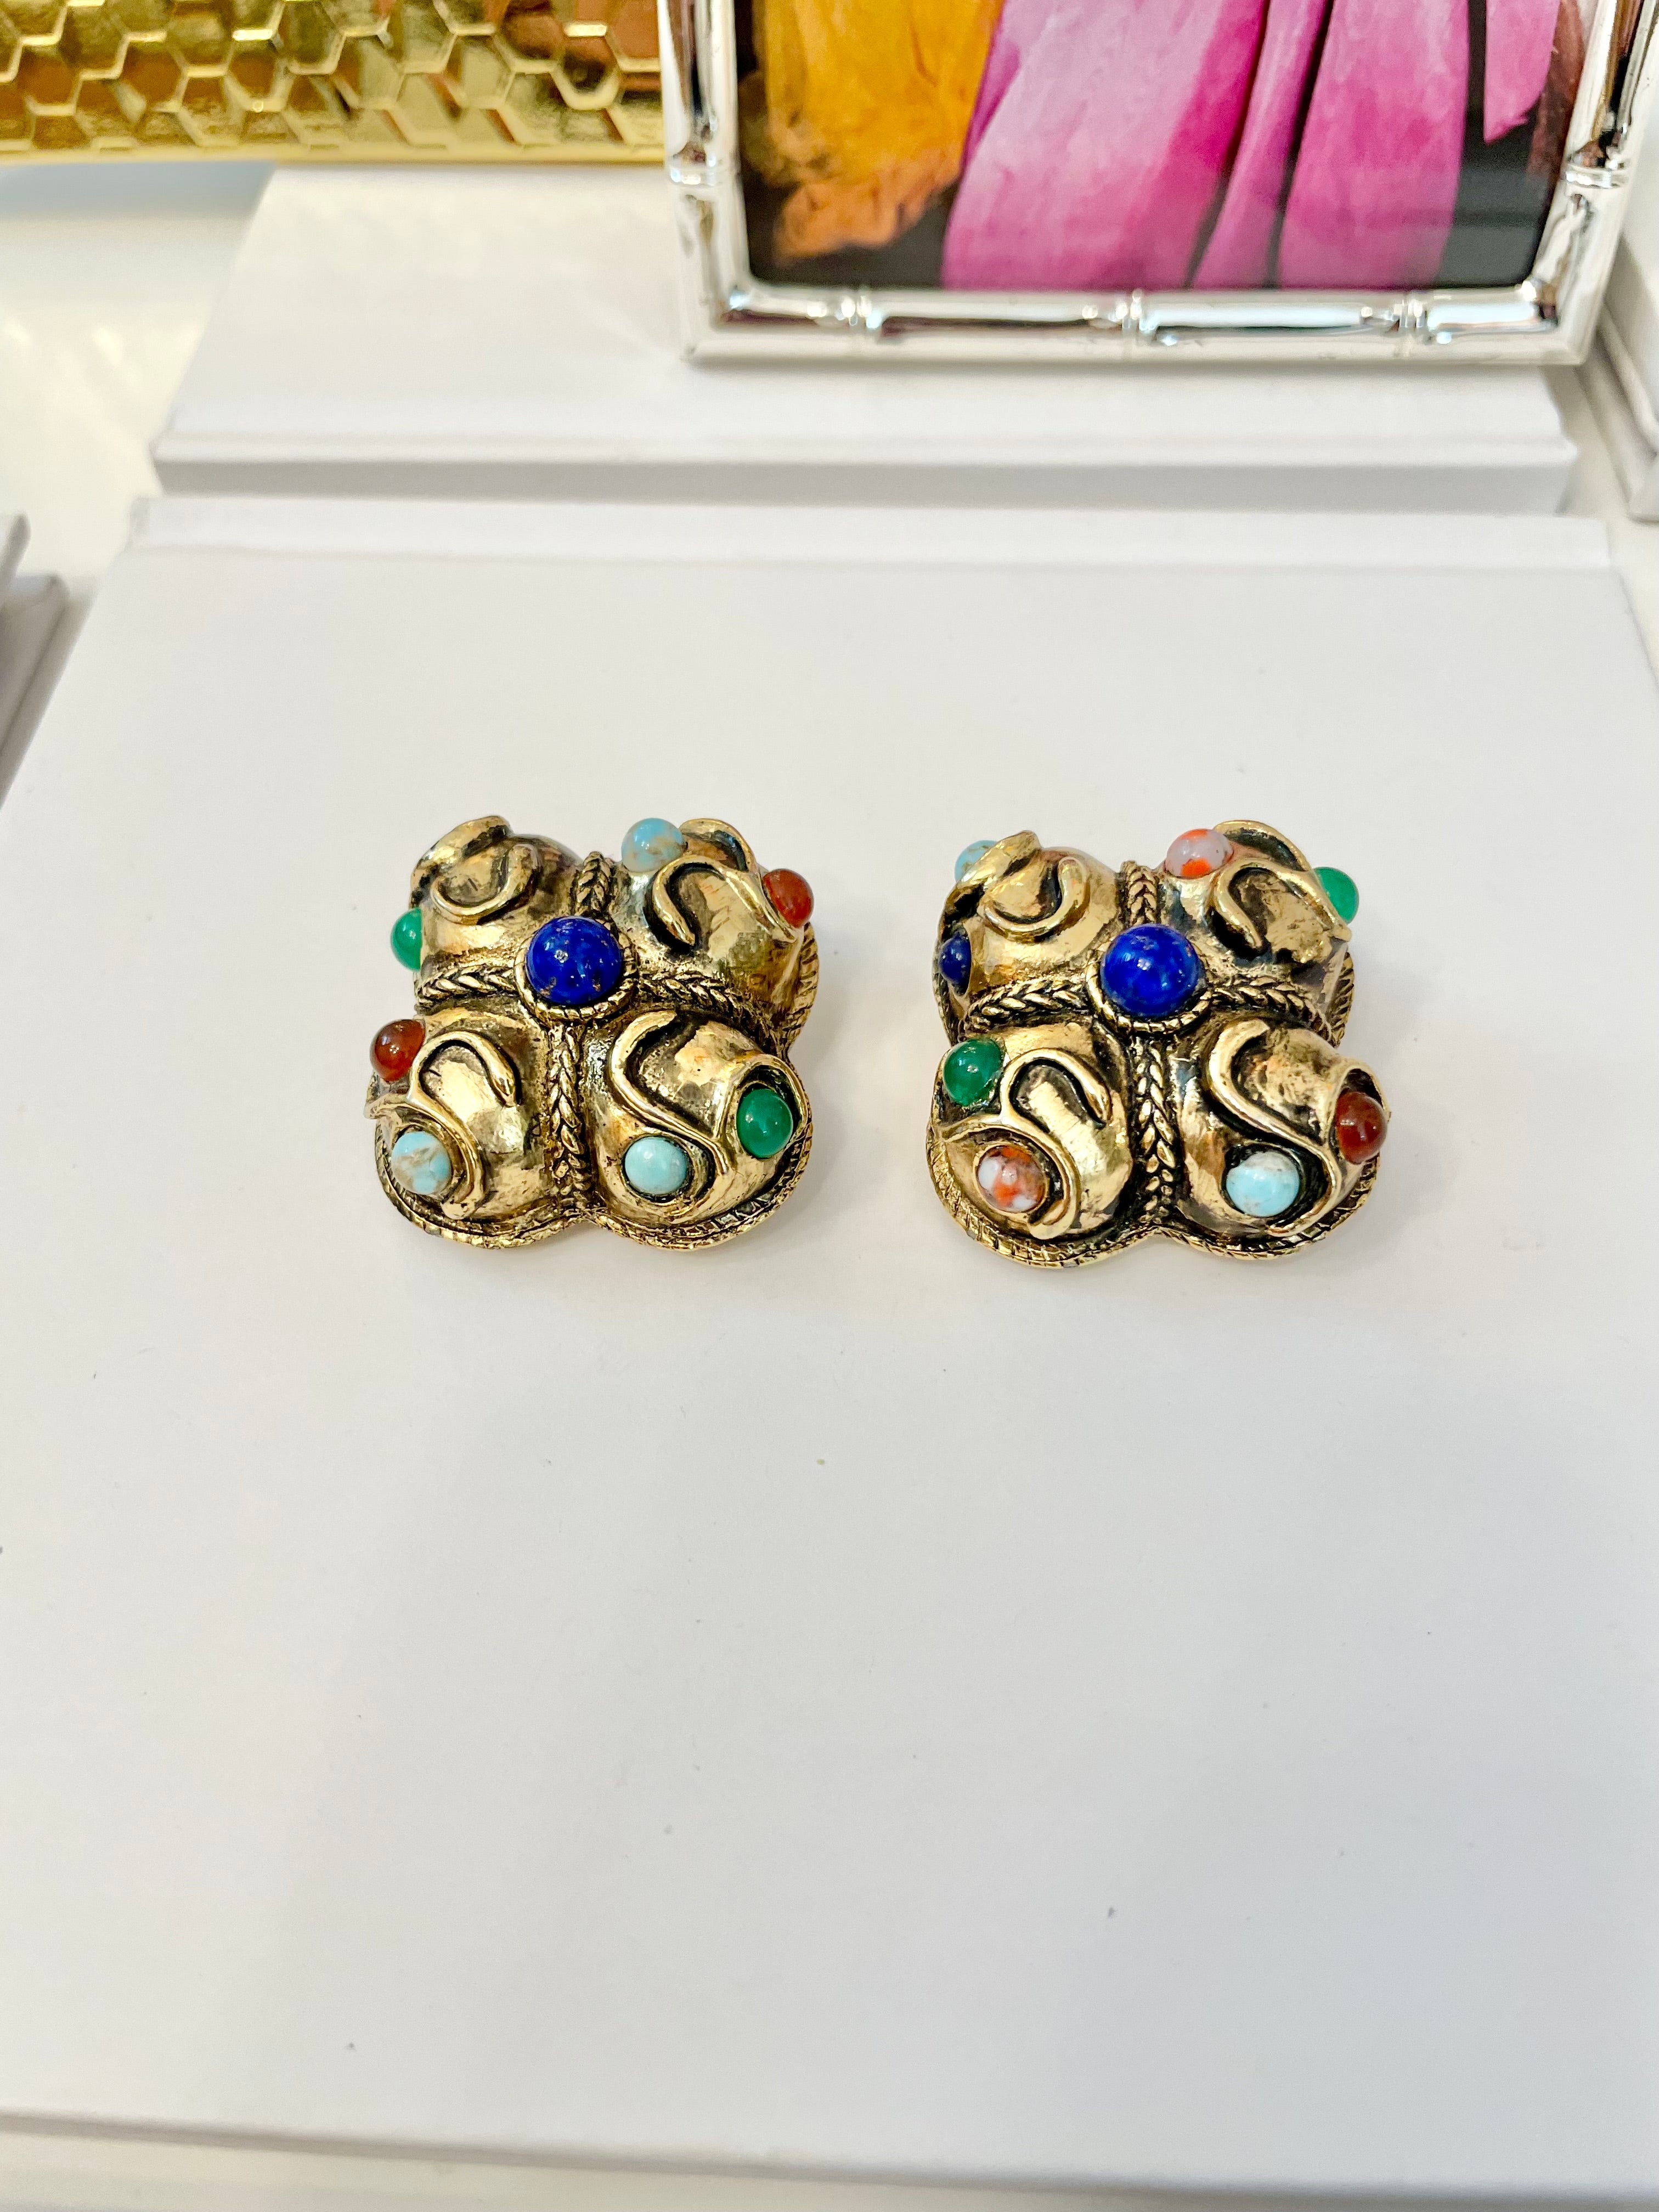 The Socialite and her love for the finest gems! These delightful gold and colorful gem earrings are extraordinary!!